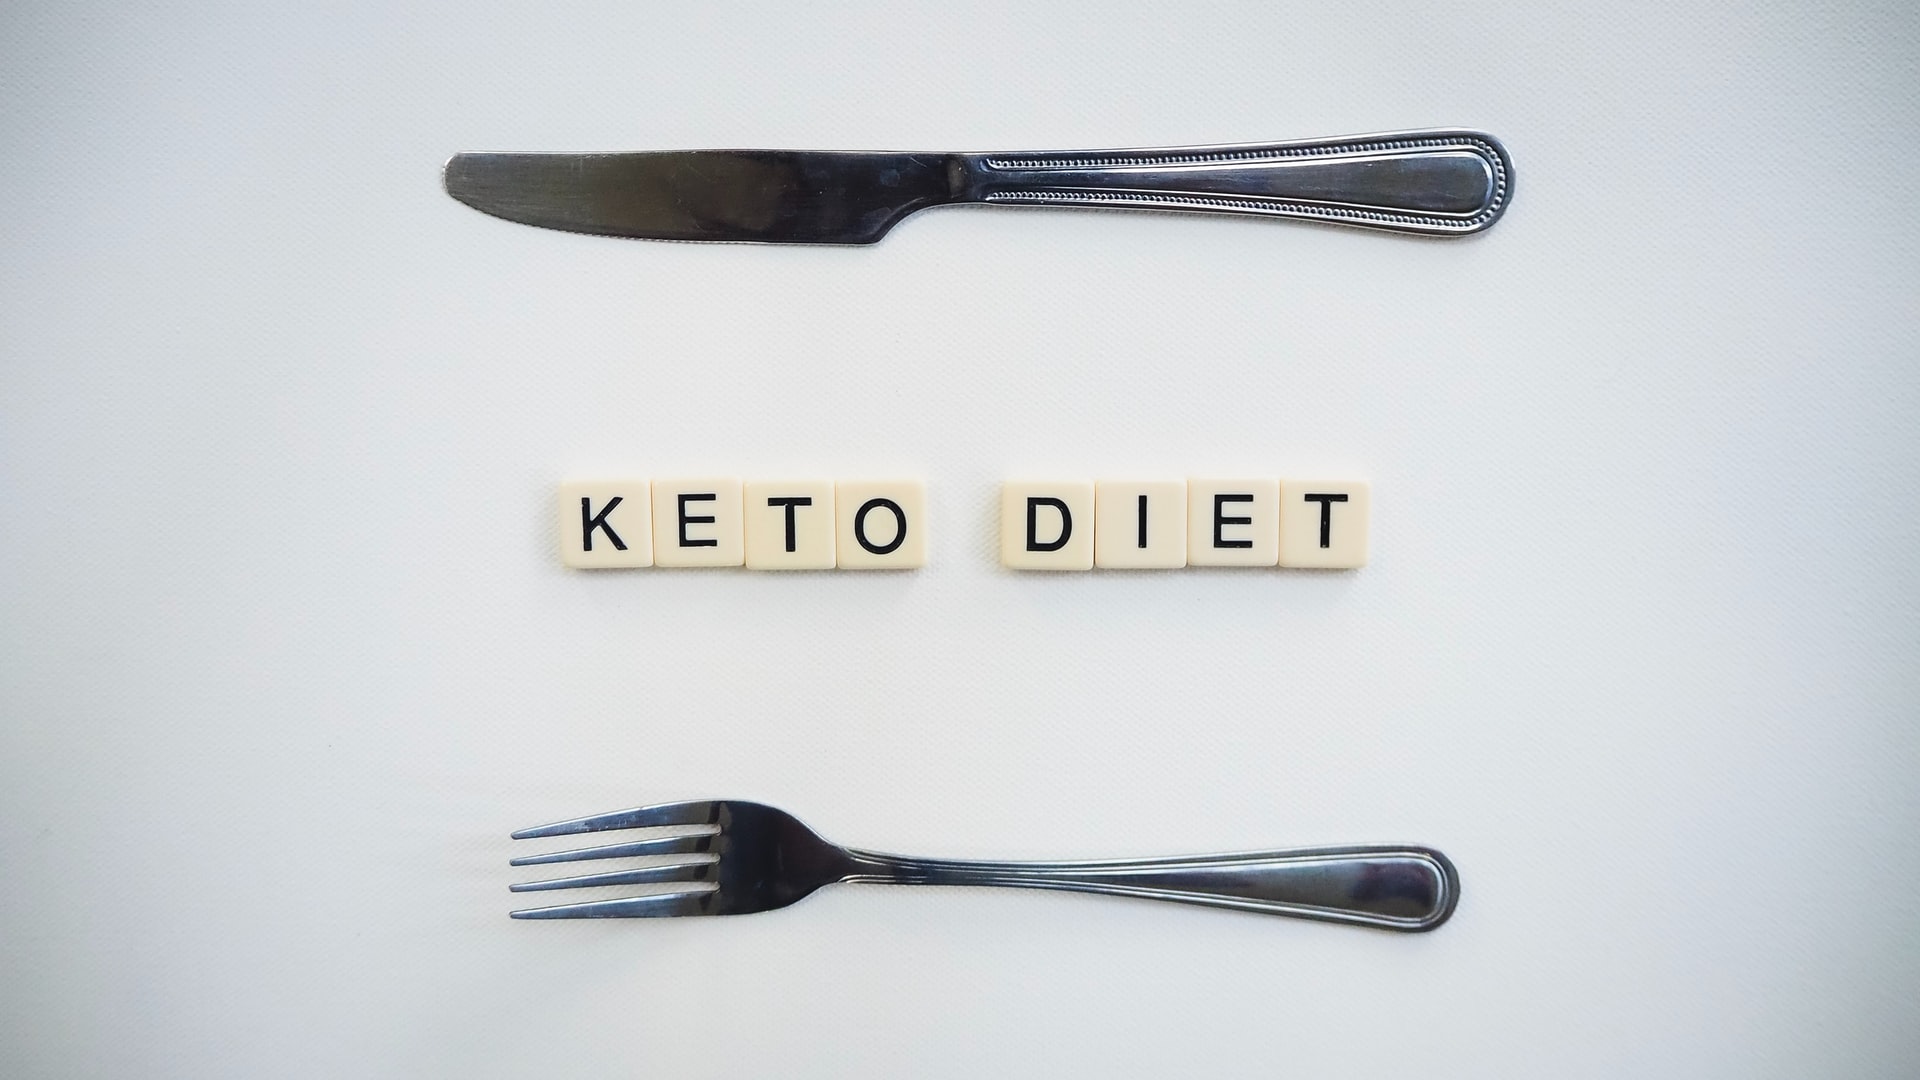 The word Keto Diet written on some scrabble tiles with a spoon and fork laying on both sides of the tiles